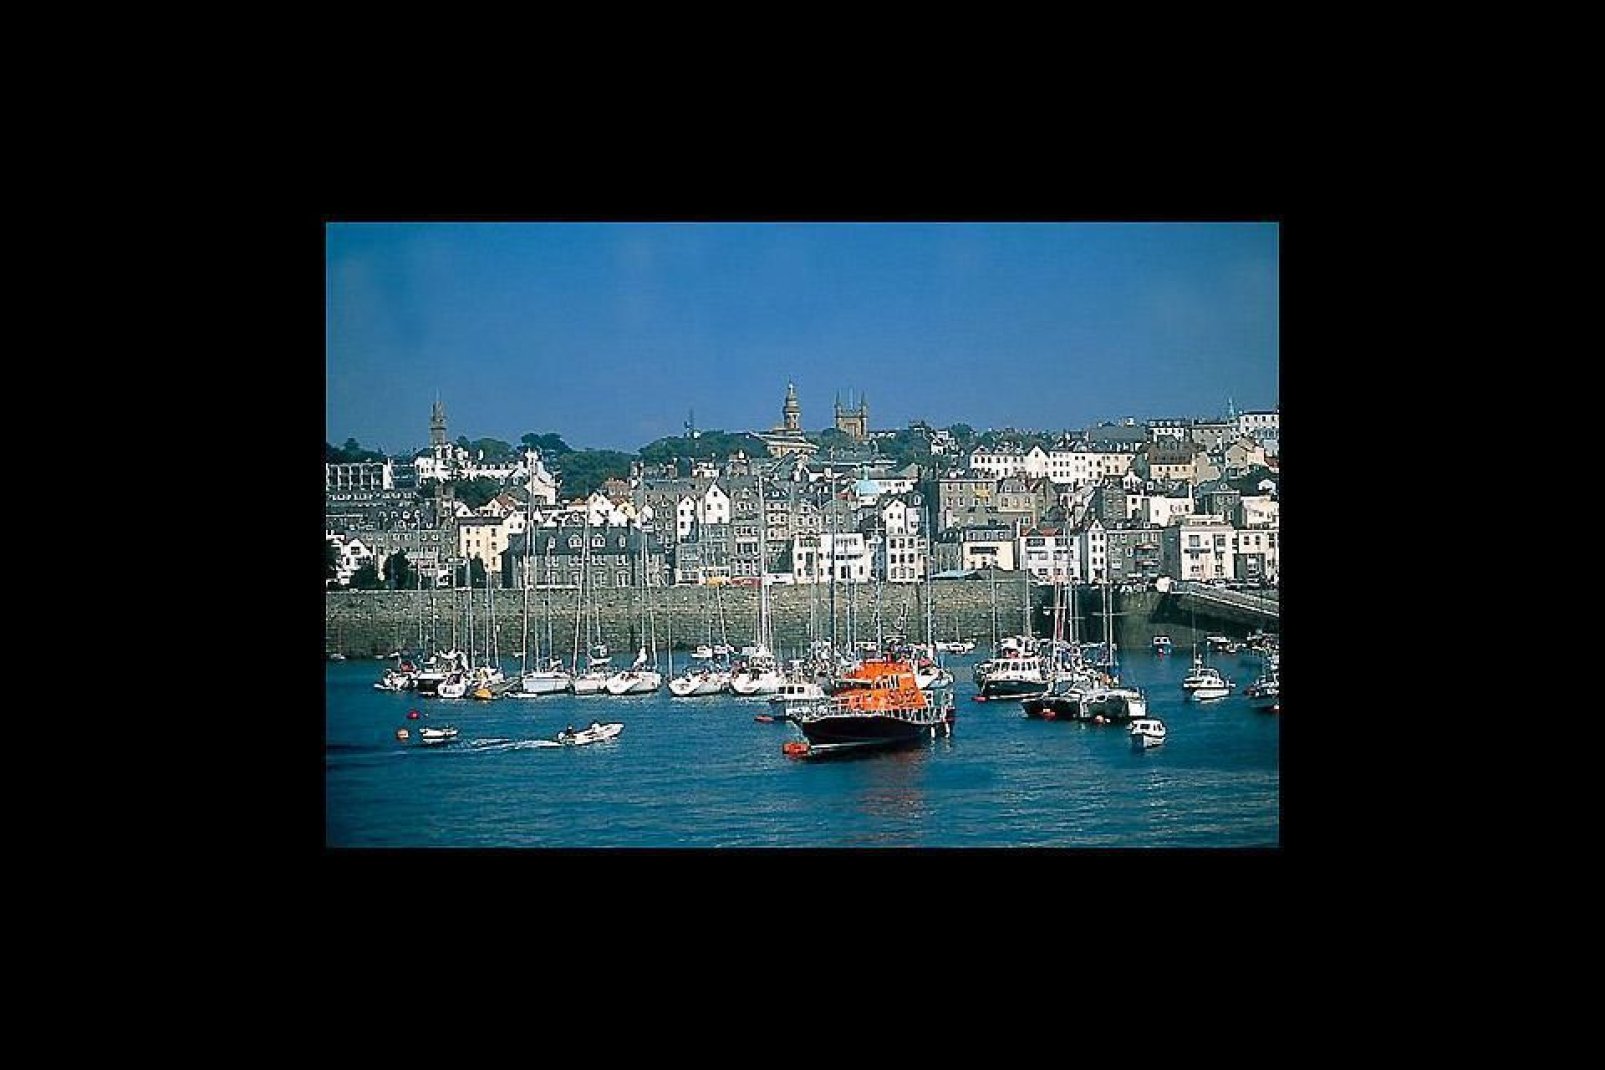 Saint Peter Port is the capital of Guernsey as well as the main port. The parish of St. Peter Port is a small town consisting mostly of steep narrow streets